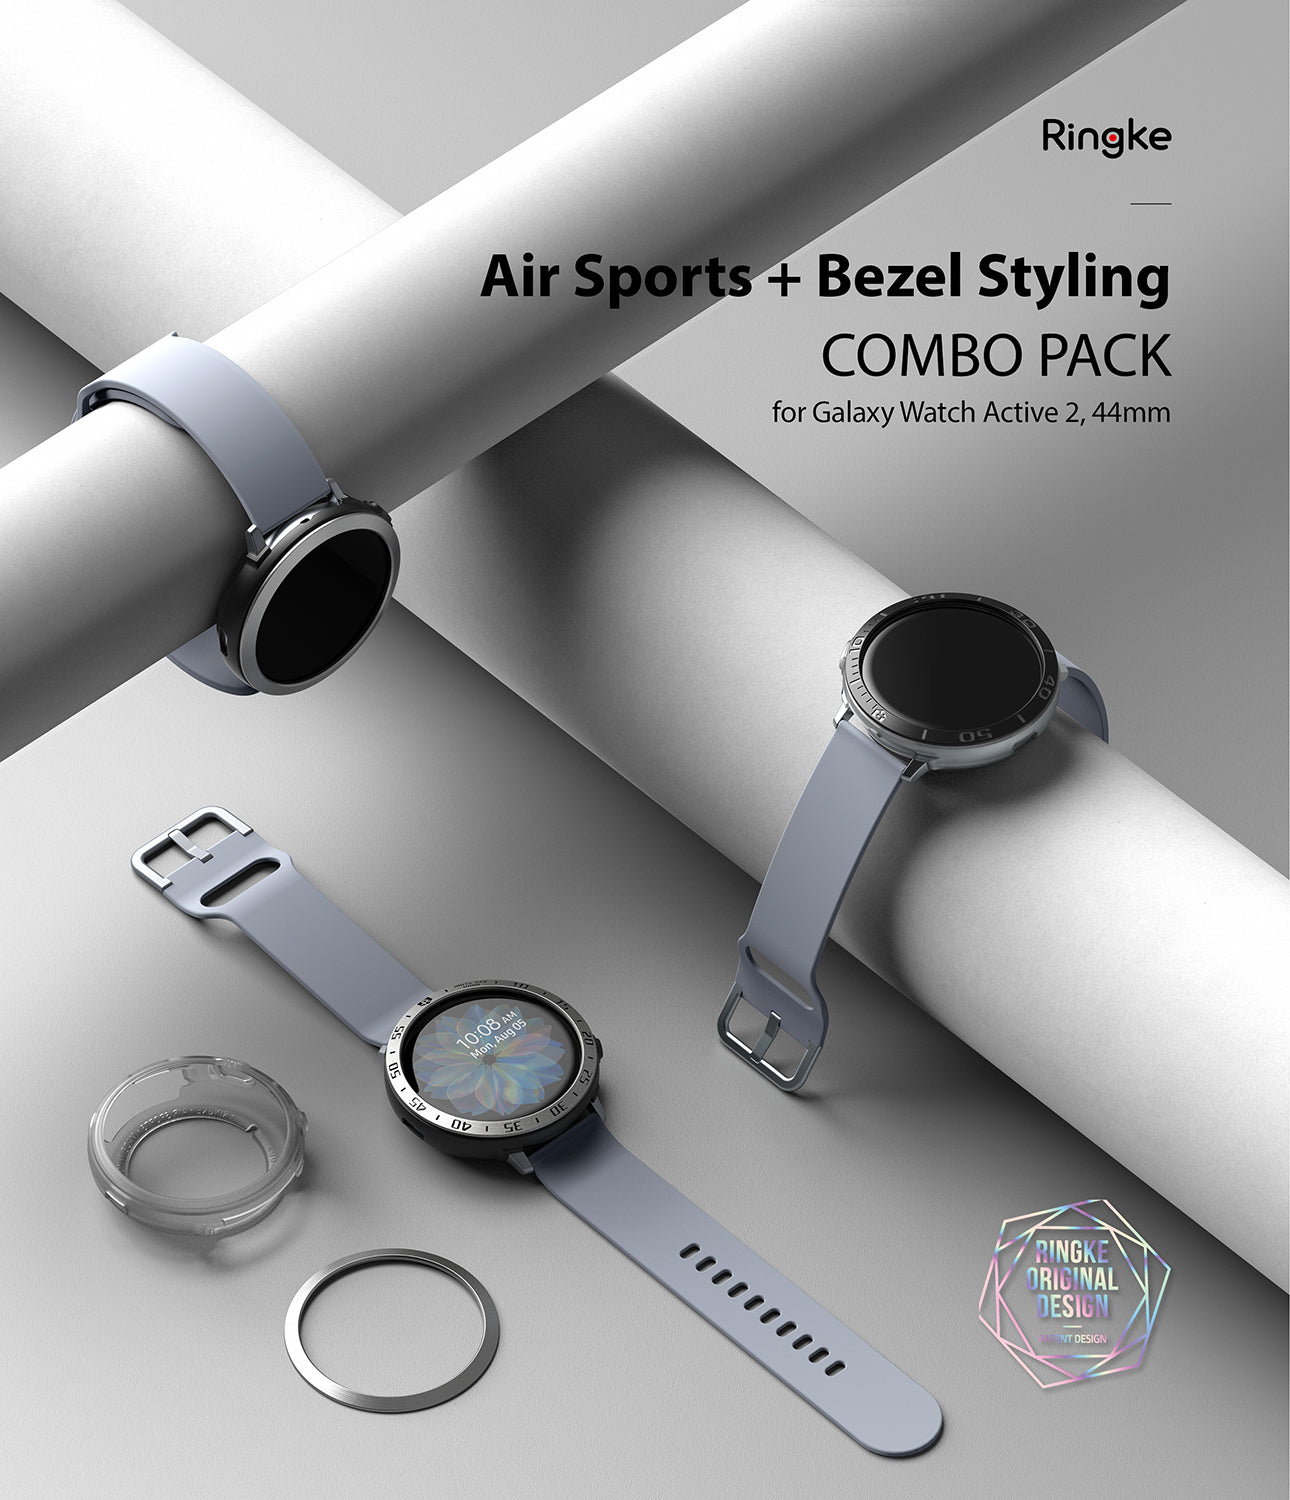 galaxy watch active 2 case air sports + bezel styling combo : black + 20